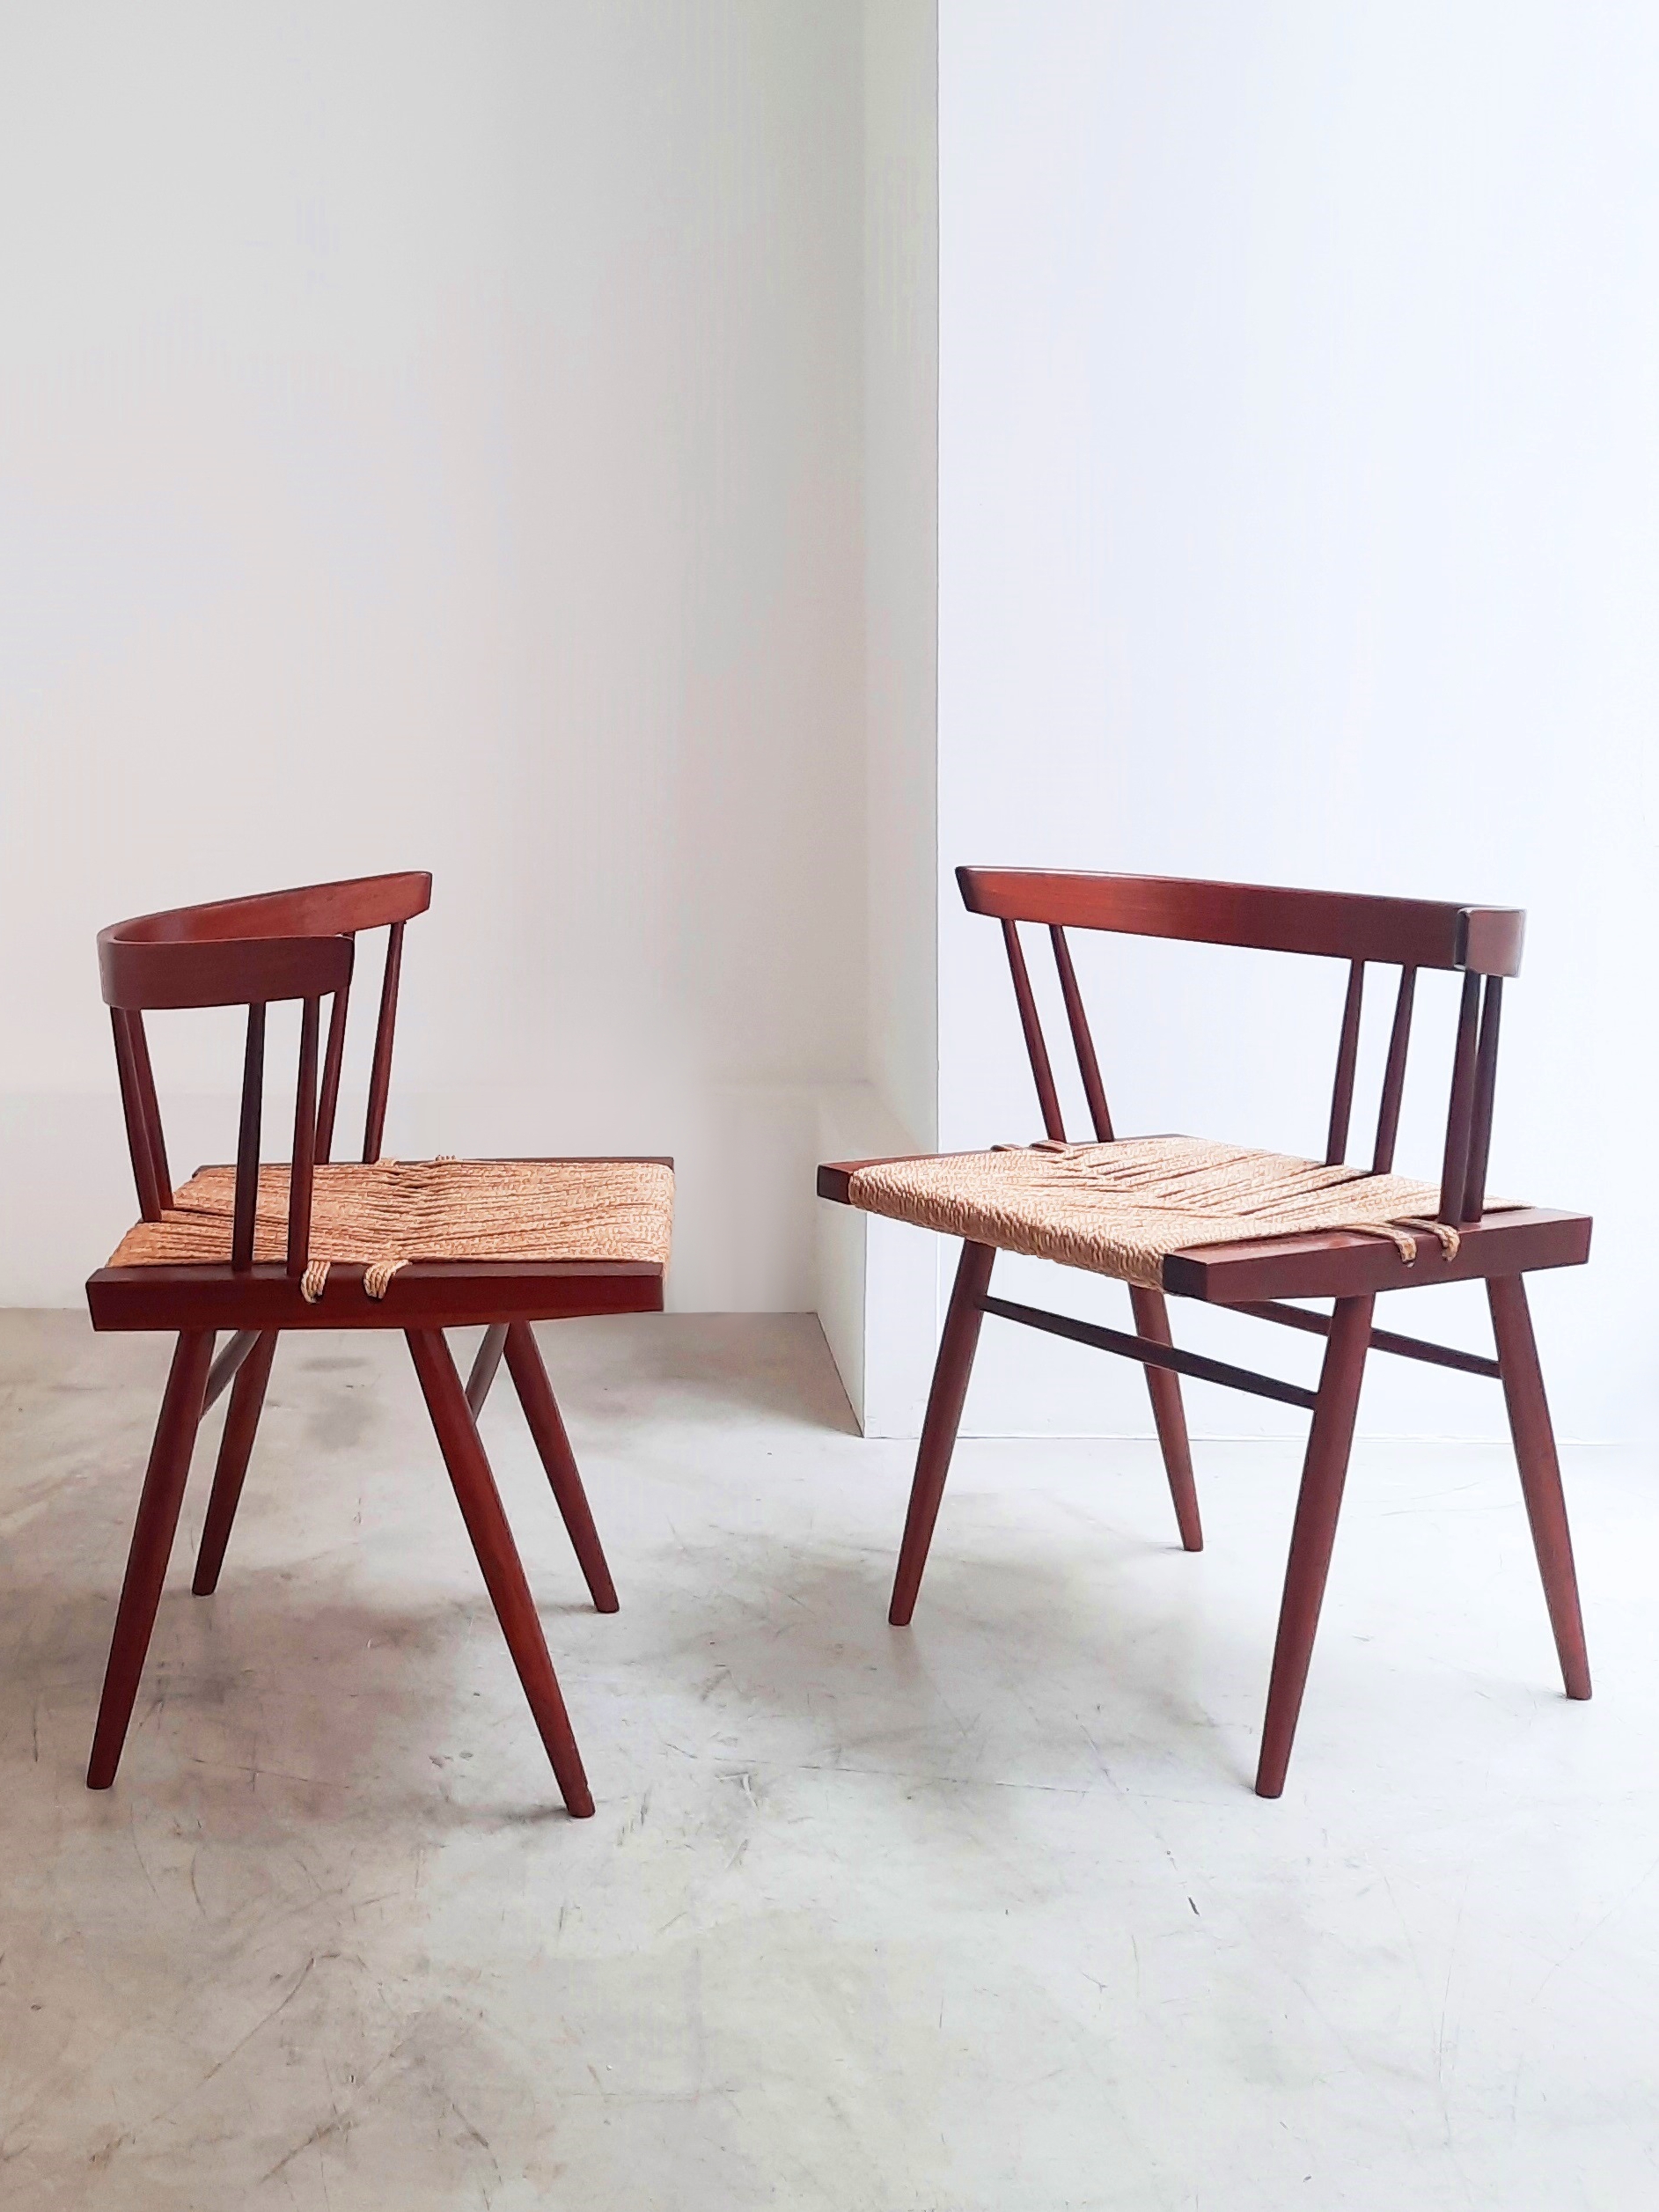 Set of 6 chairs “Seagrass” NAKASHIMA George